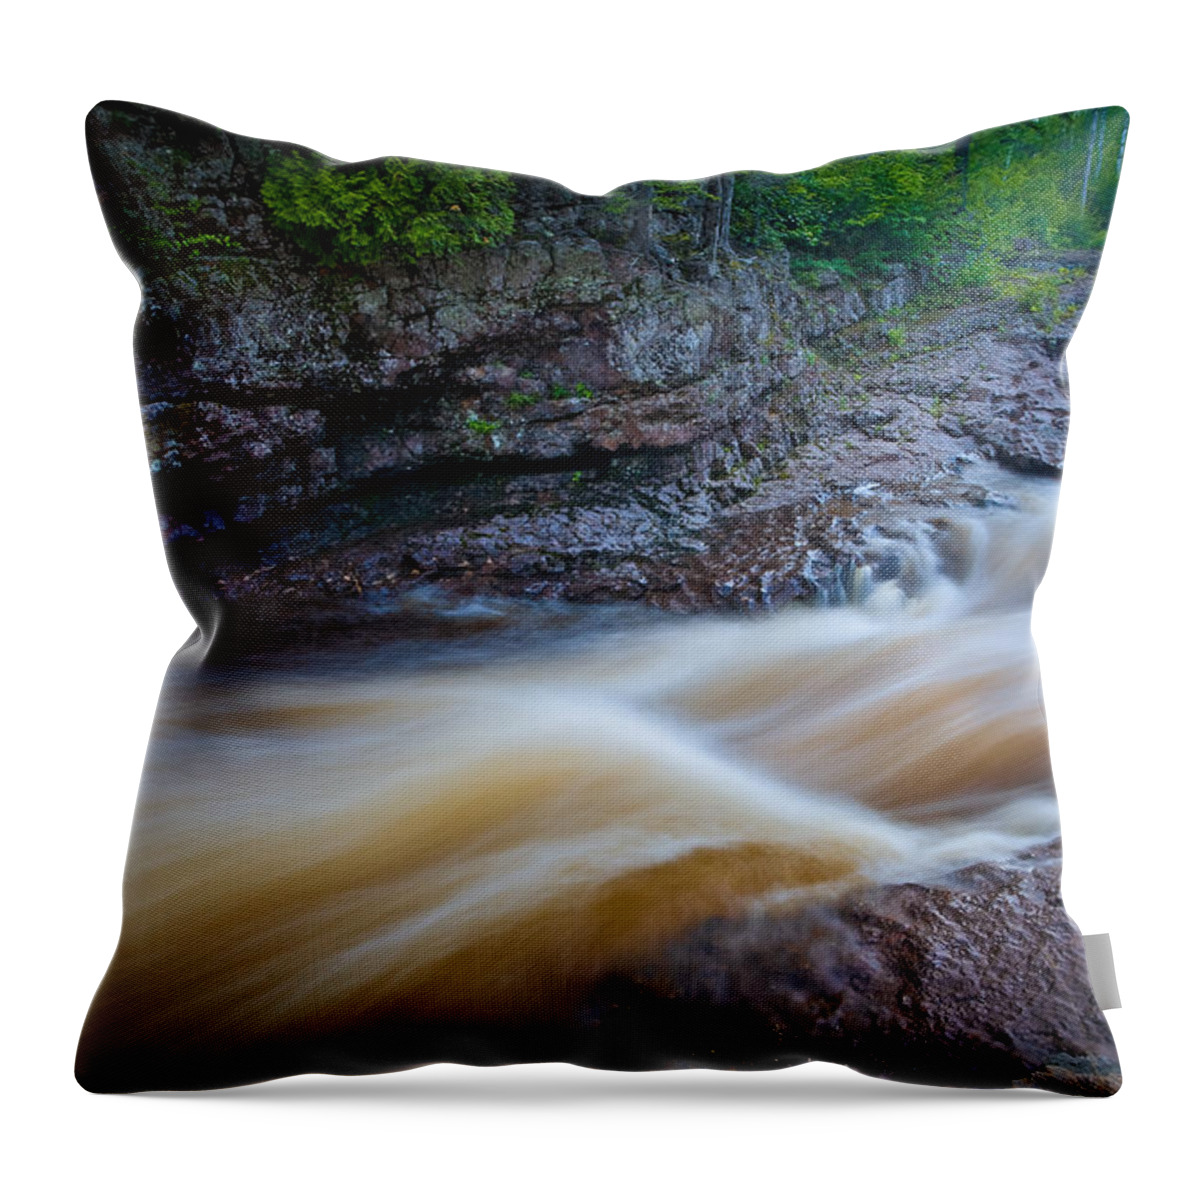 Flowing Throw Pillow featuring the photograph From the Top of Temperence River Gorge by Rikk Flohr